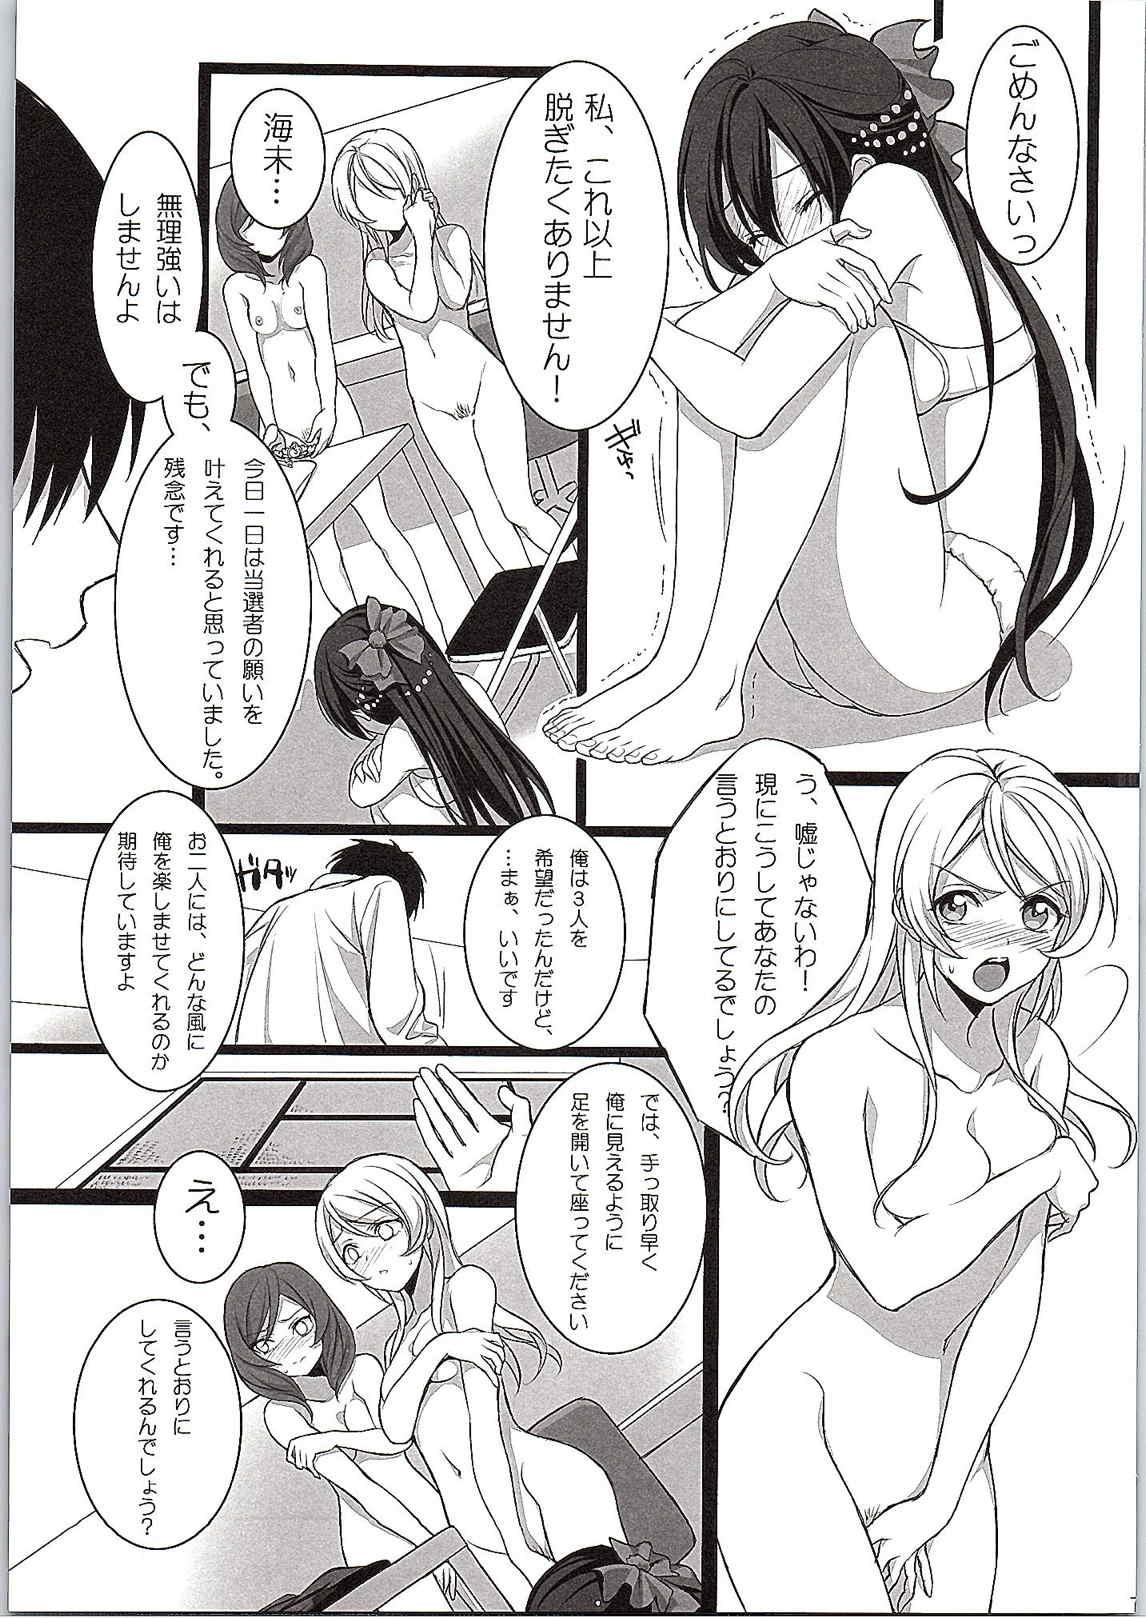 Satin Target - Love live Mulher - Page 6